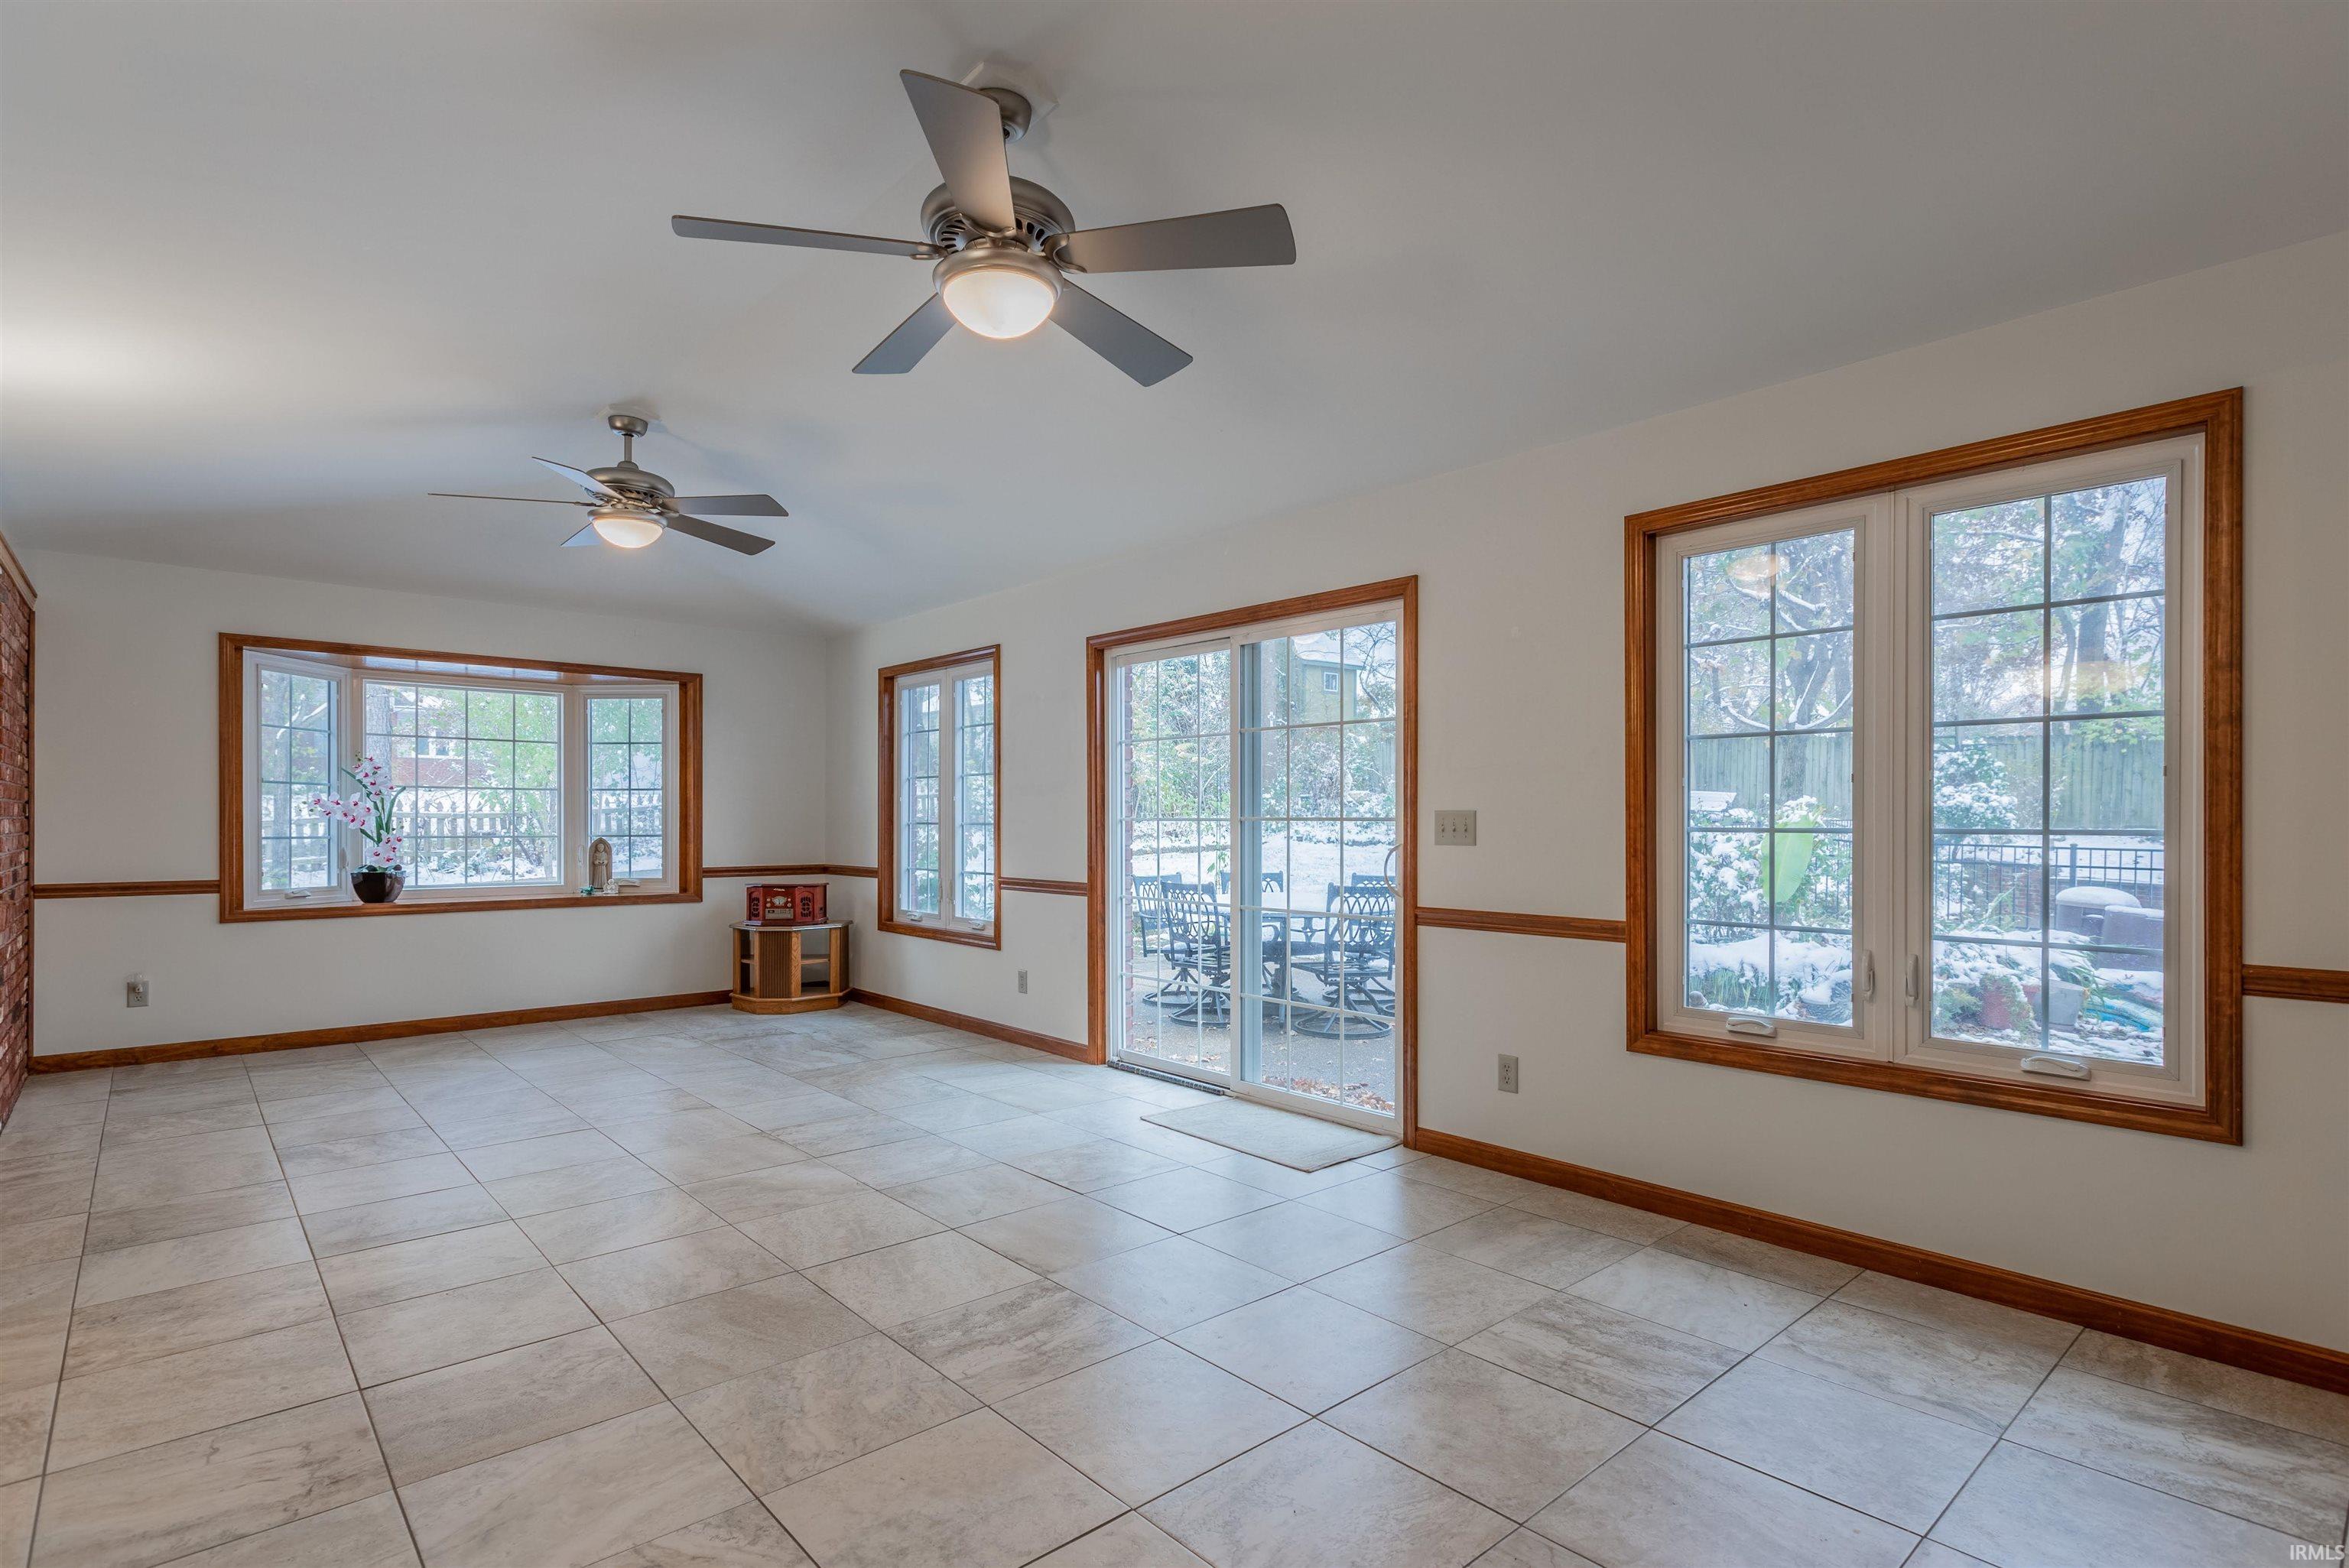 ...with two Ceiling Fans, Bay Window, Patio Doors to Flex Room and to outside Patio